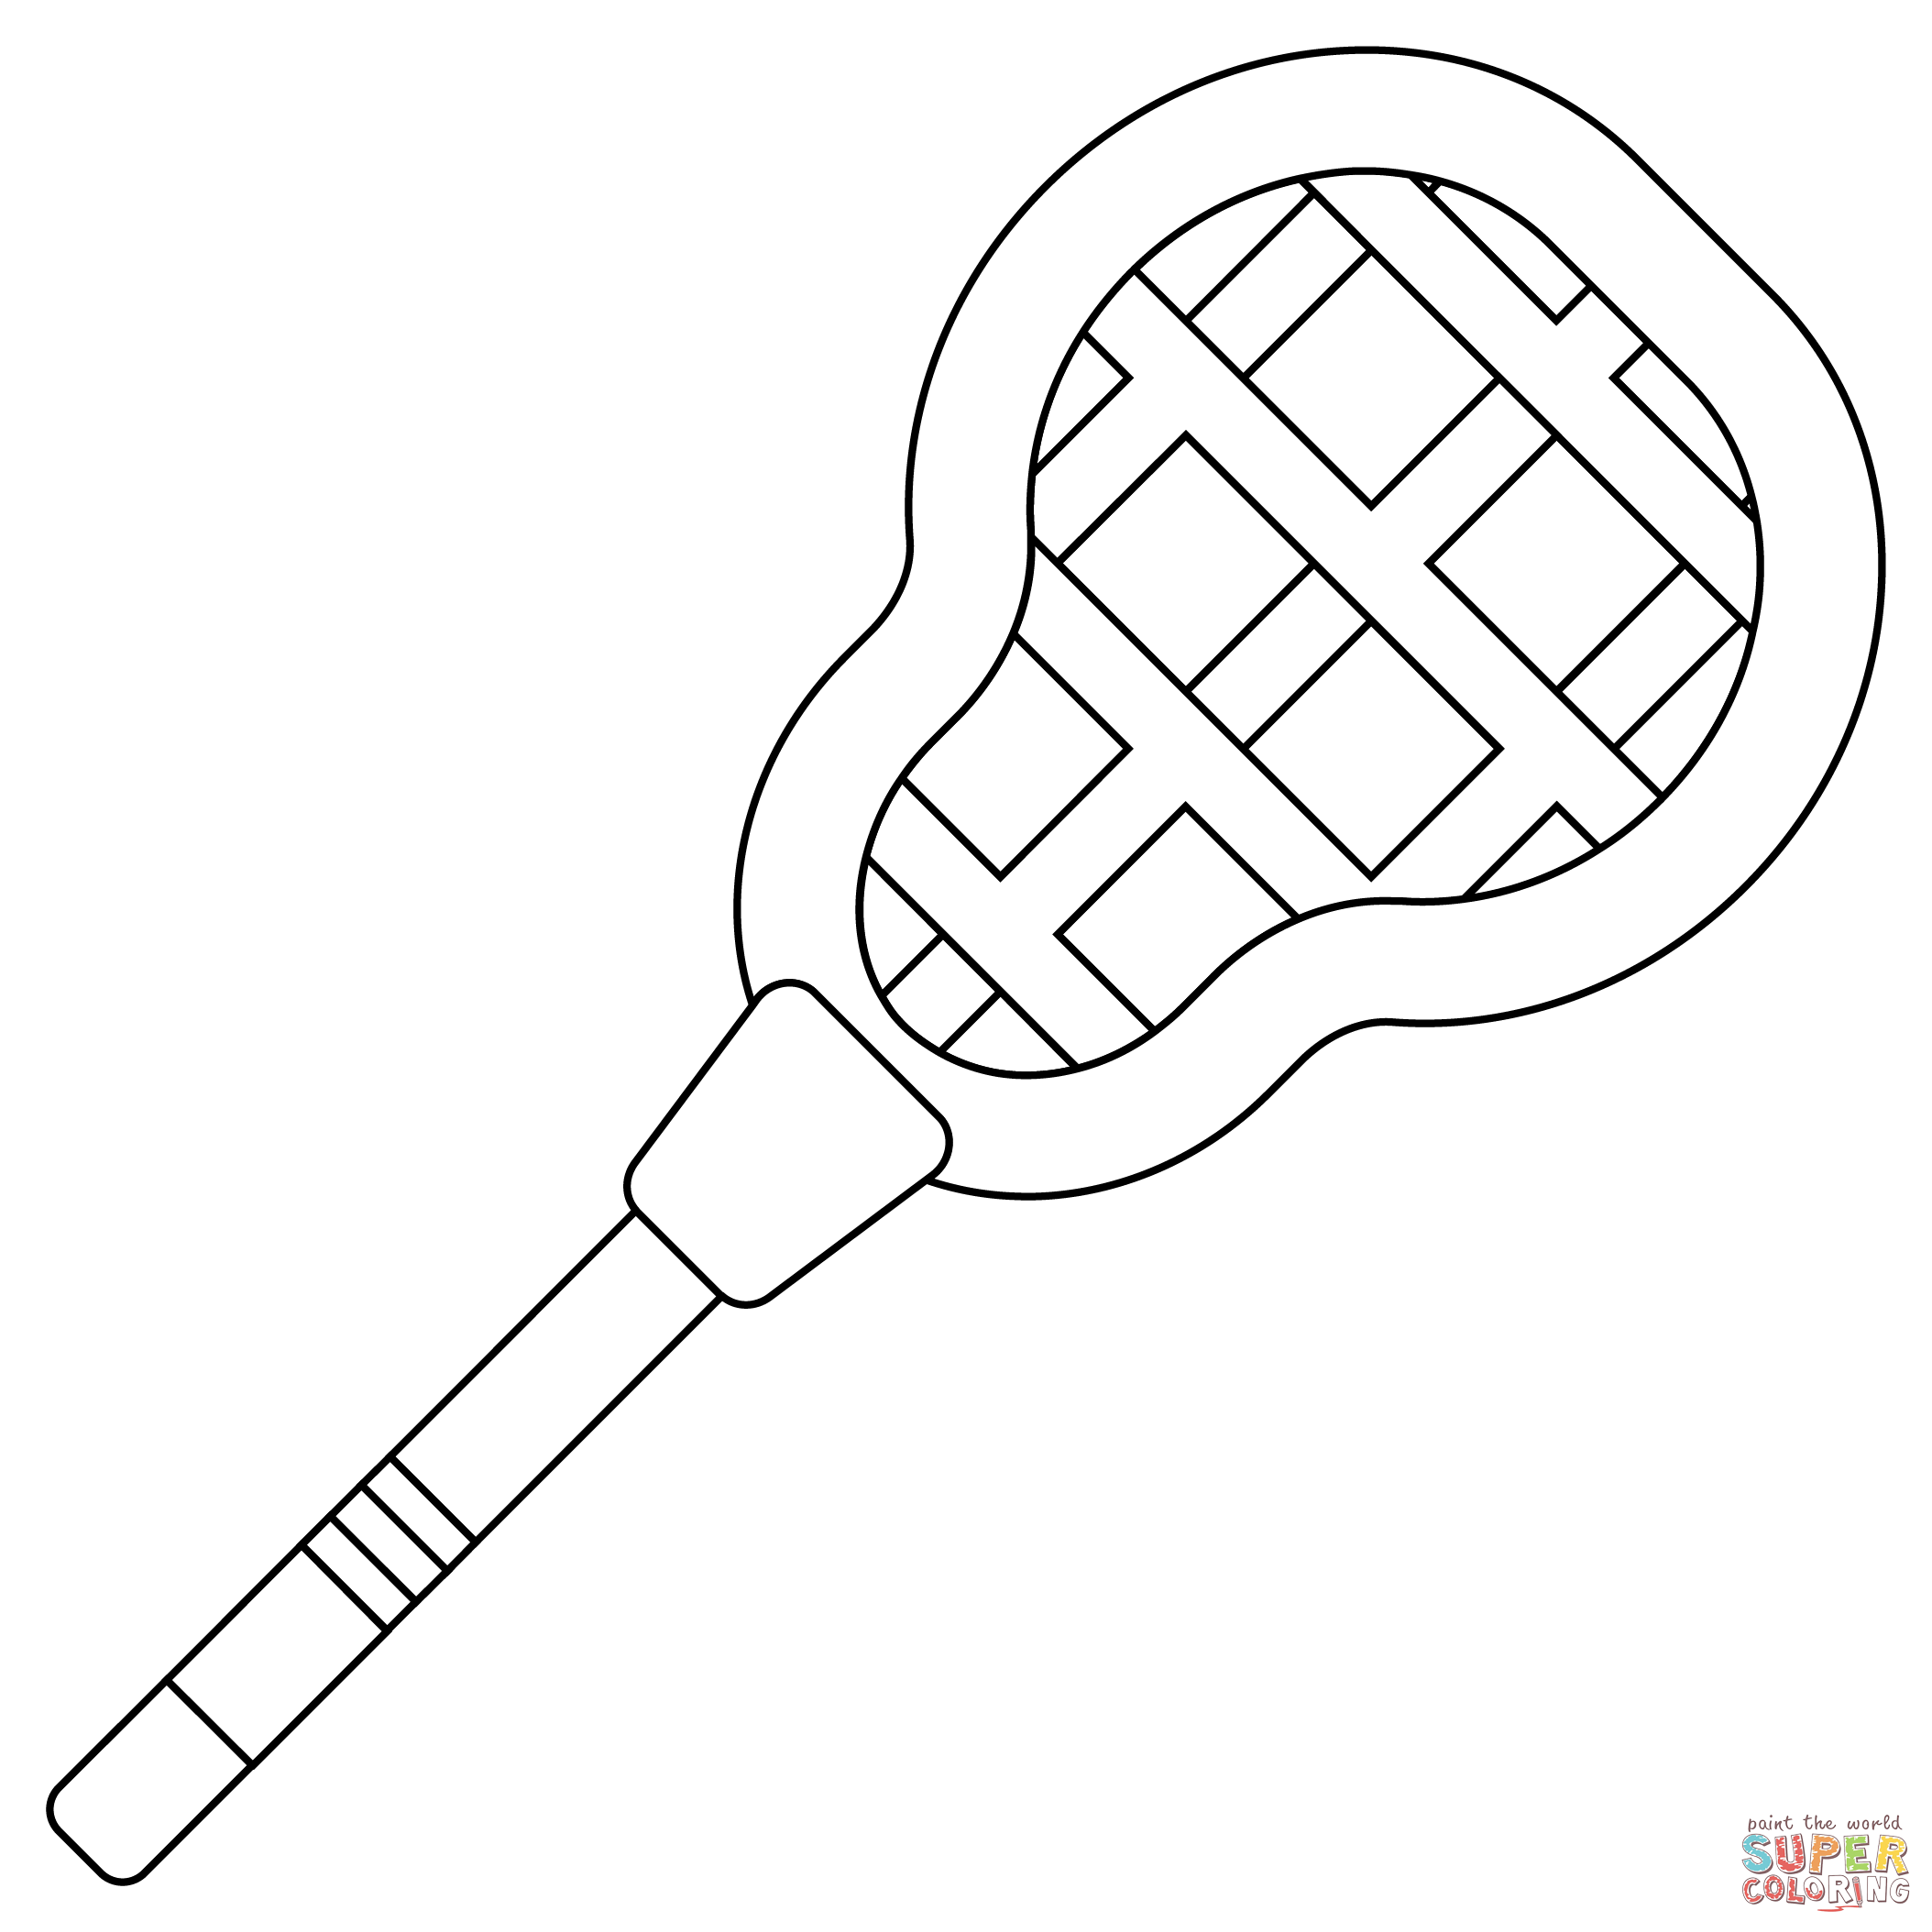 Lacrosse stick coloring page free printable coloring pages